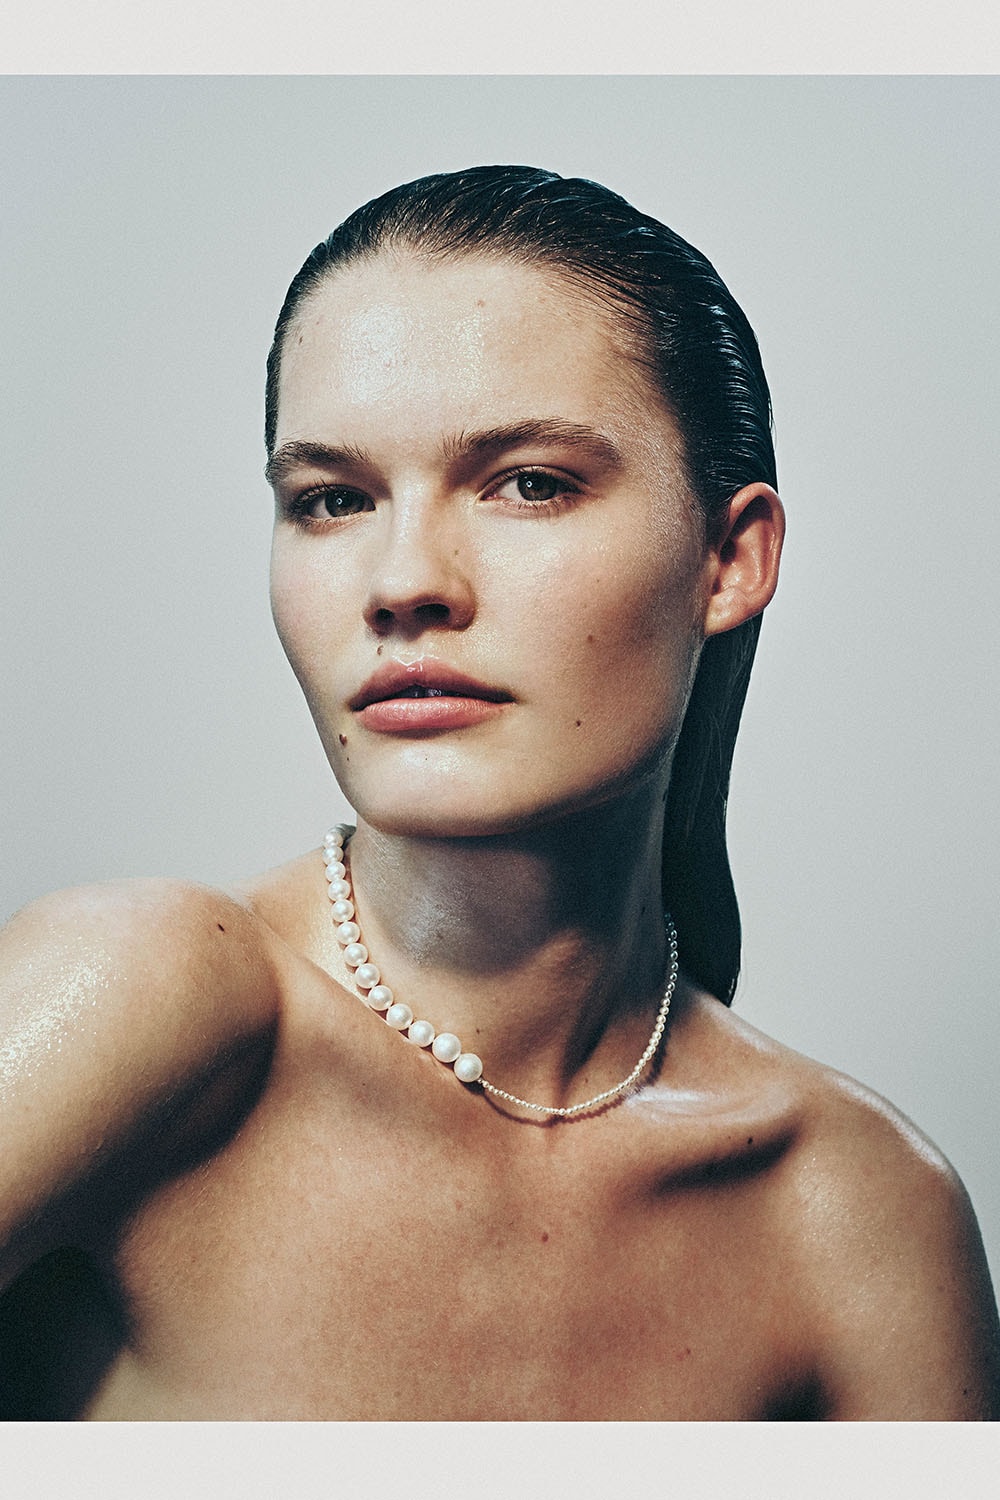 Sophie Bille Brahe "Splash Bleu" Jewelry Collection Fall Winter 2021 Necklace Earrings Diamonds Pearls Gold Silver